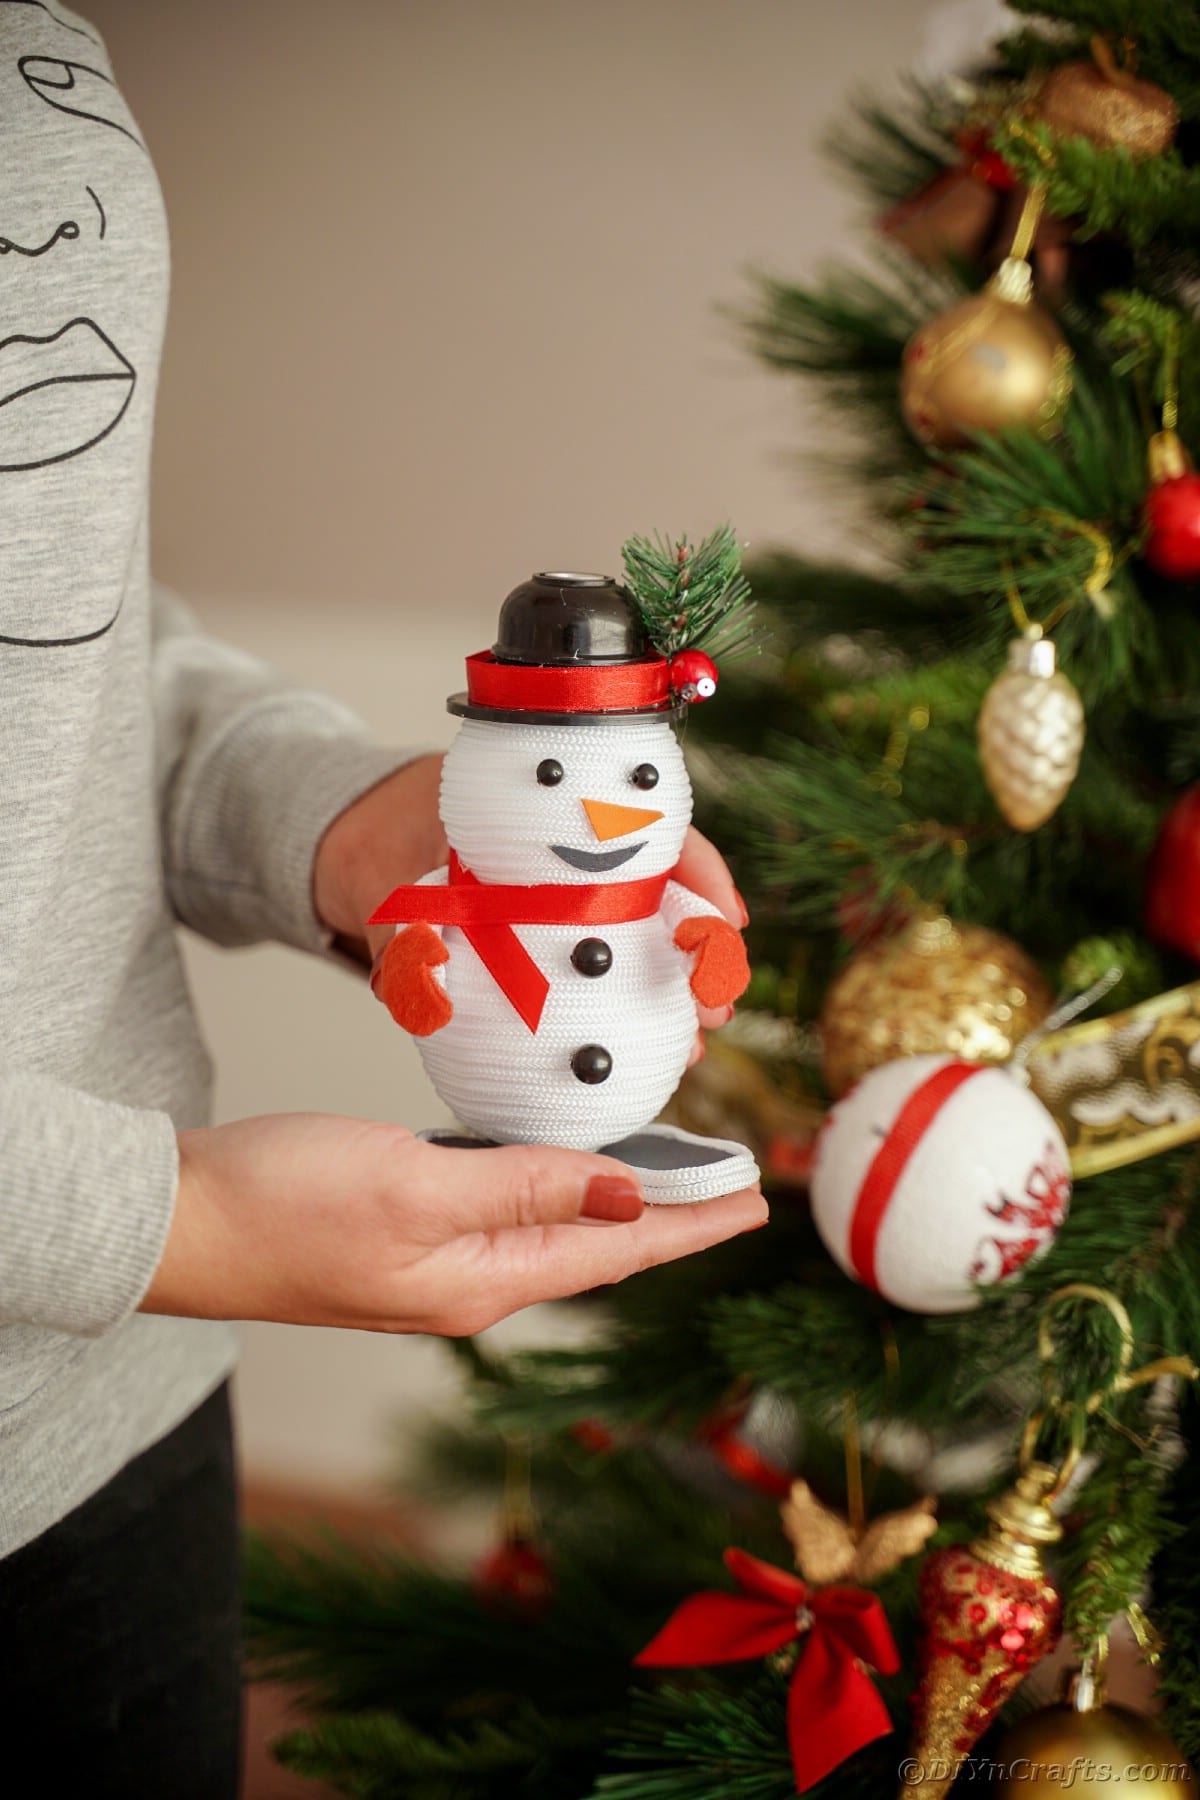 person holding a mini snowman decoration by Christmas tree